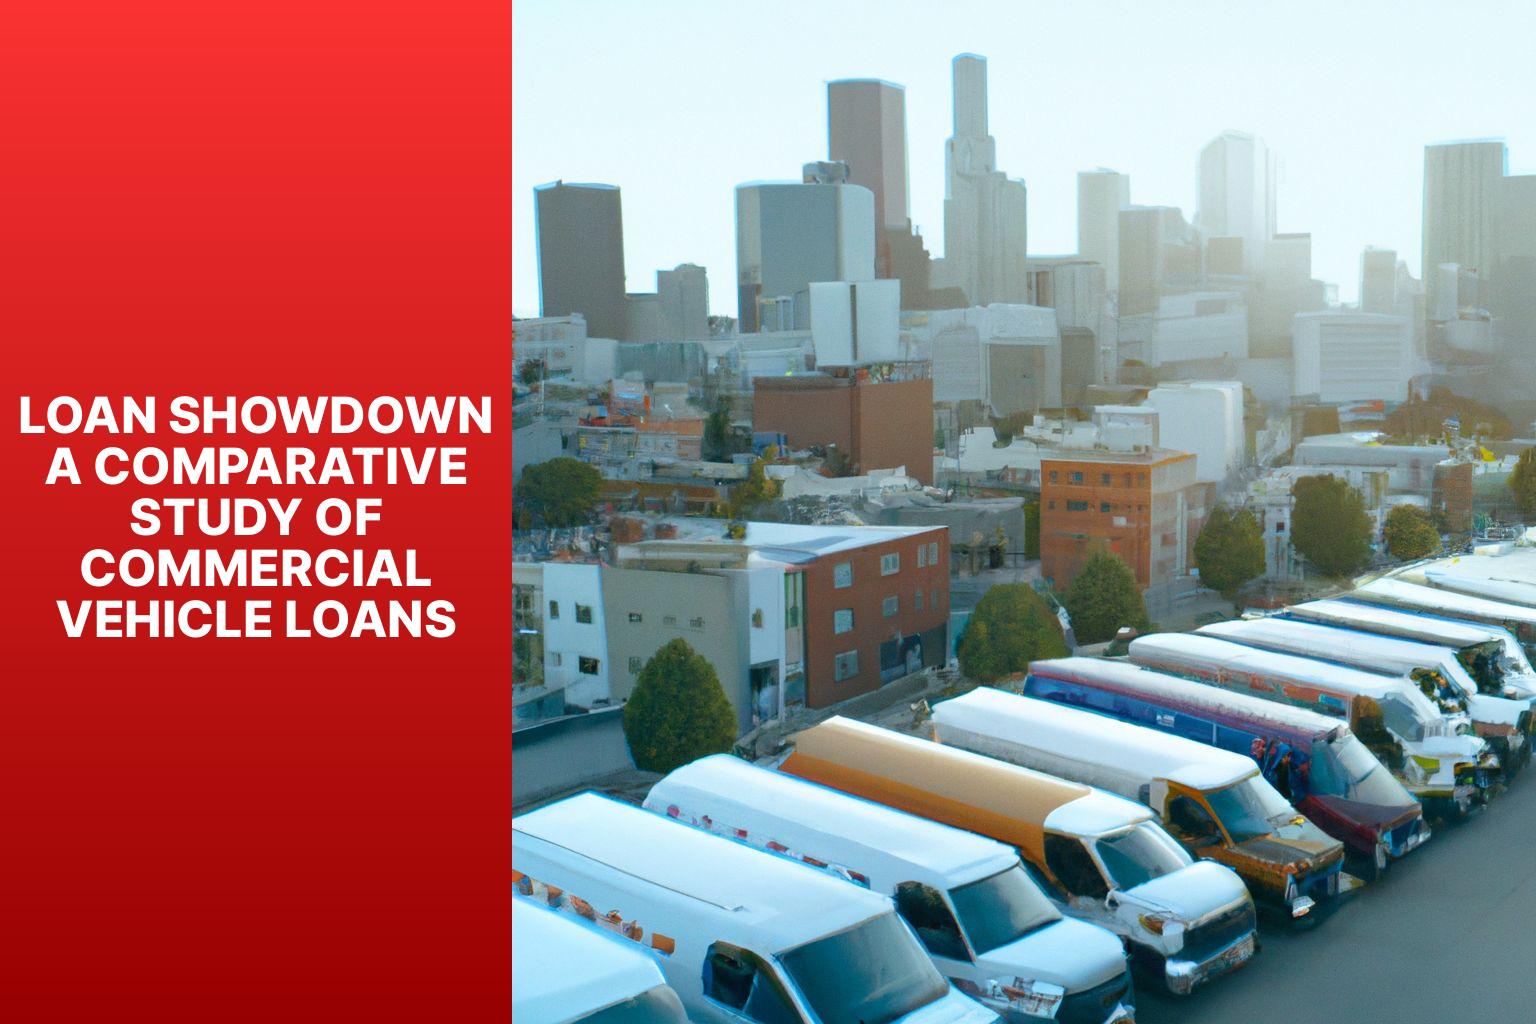 Loan Showdown A Comparative Study of Commercial Vehicle Loans